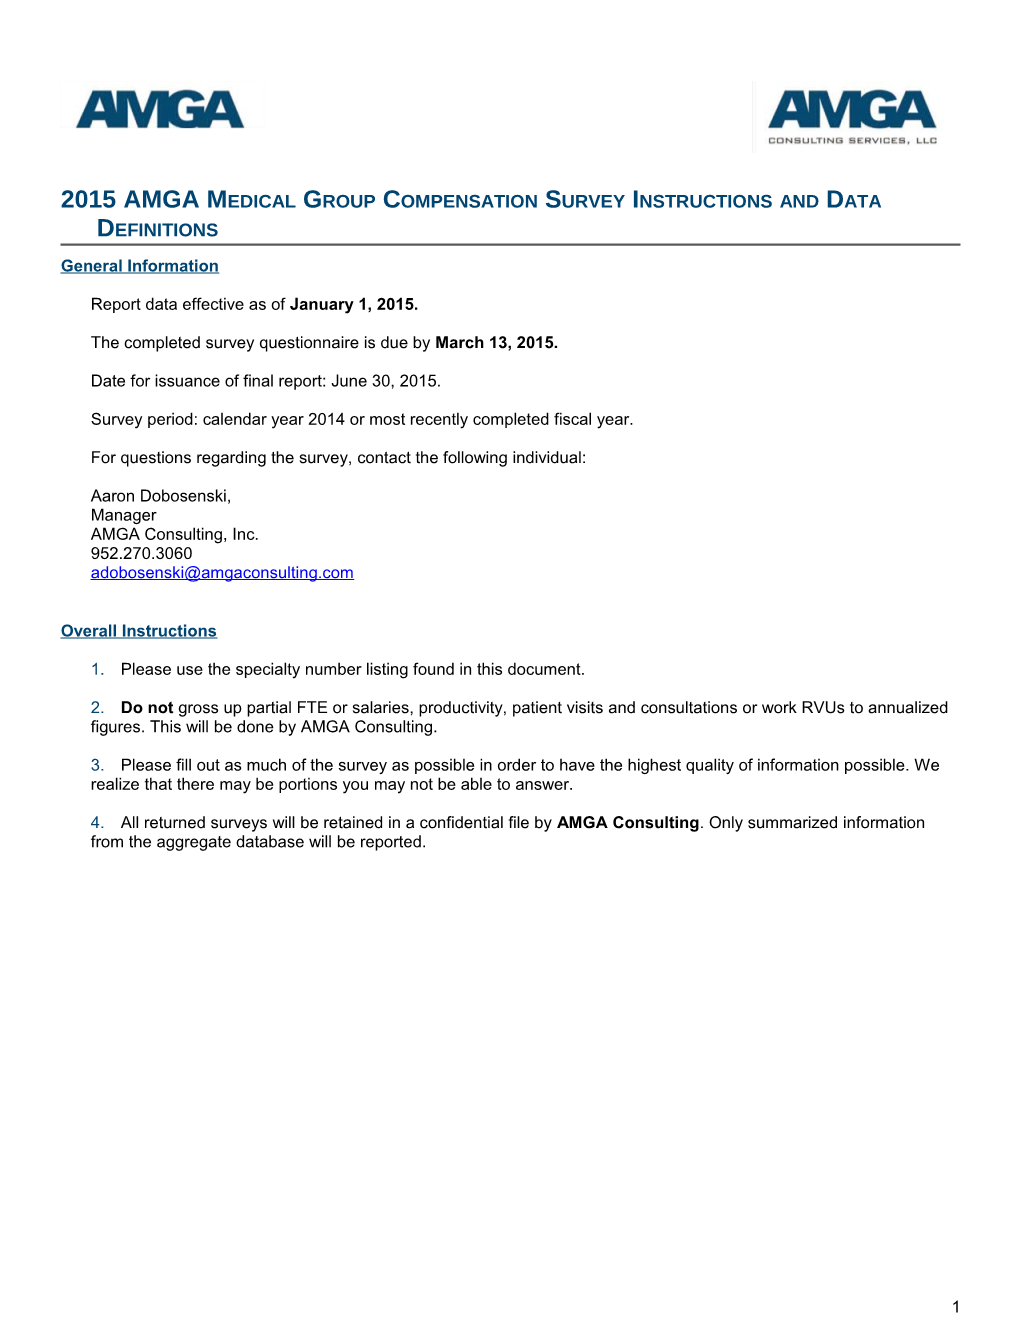 2015 AMGA Medical Group Compensation Survey Instructions and Data Definitions